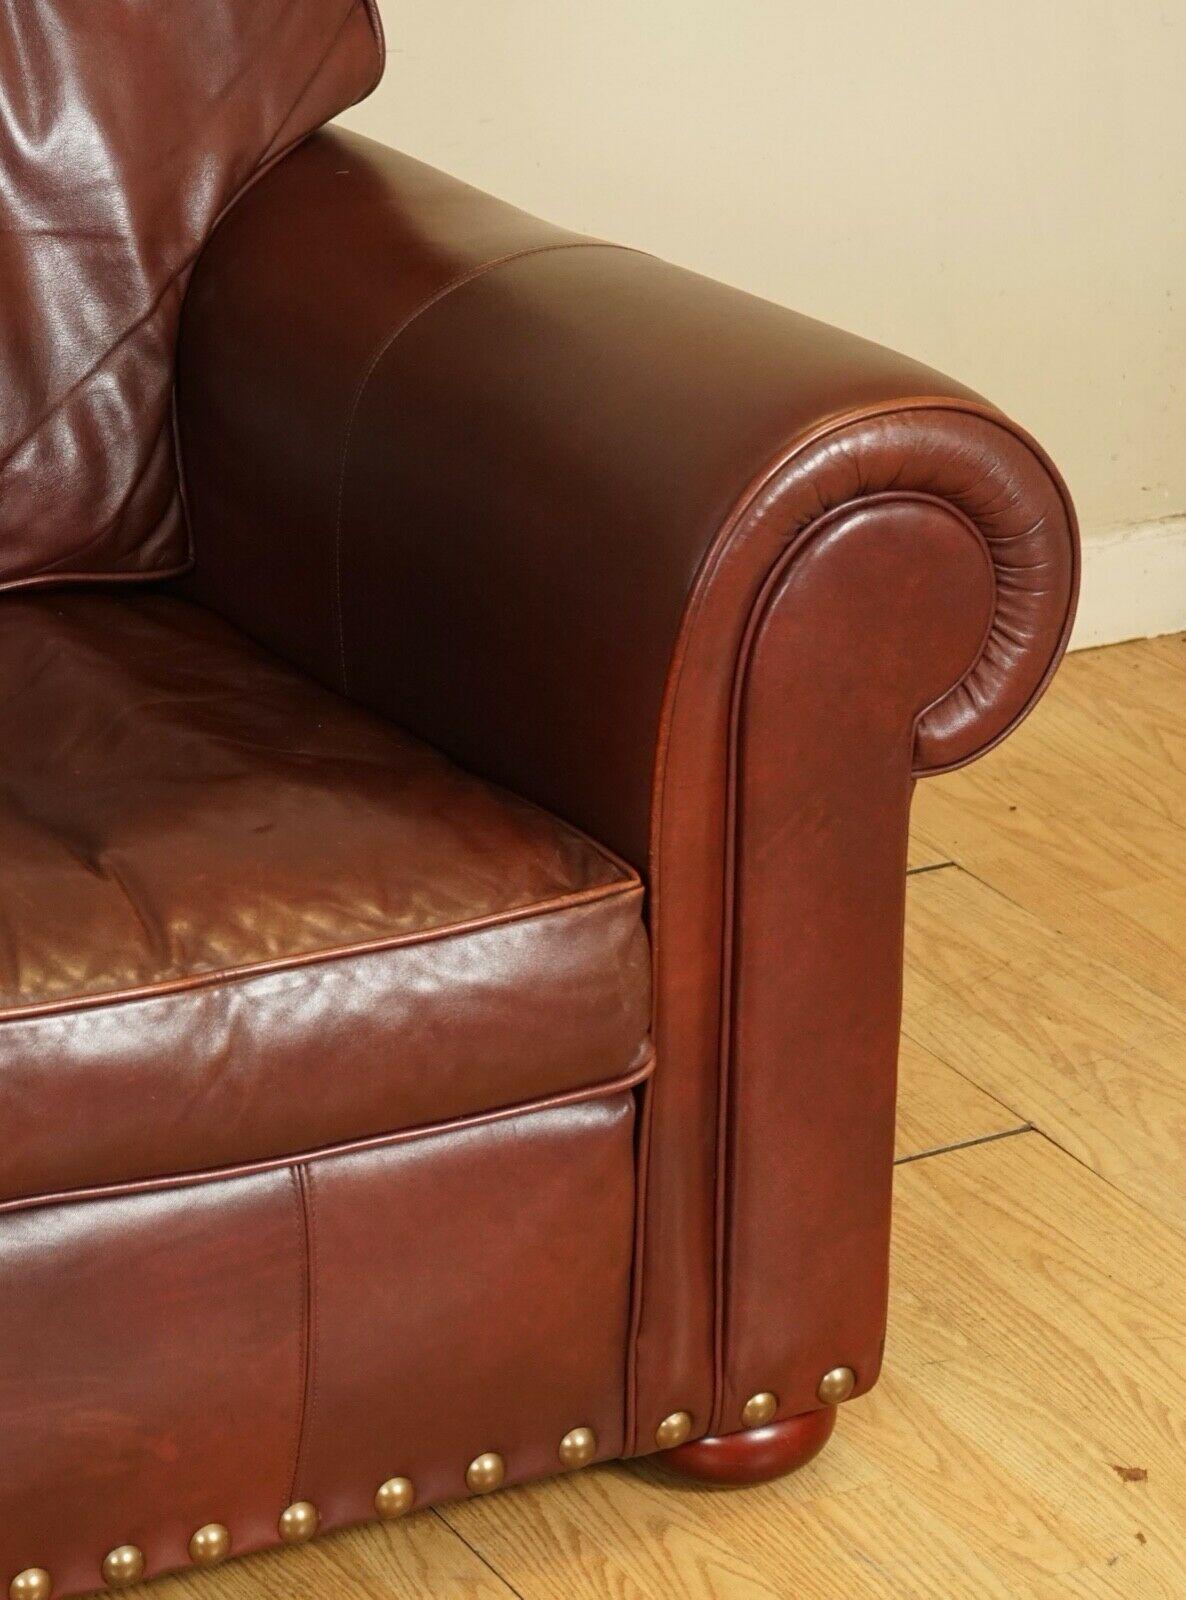 Hand-Crafted Stunning Wade Upholstery Reddish Brown Berrington Grand Sofa, 2 Seat Available